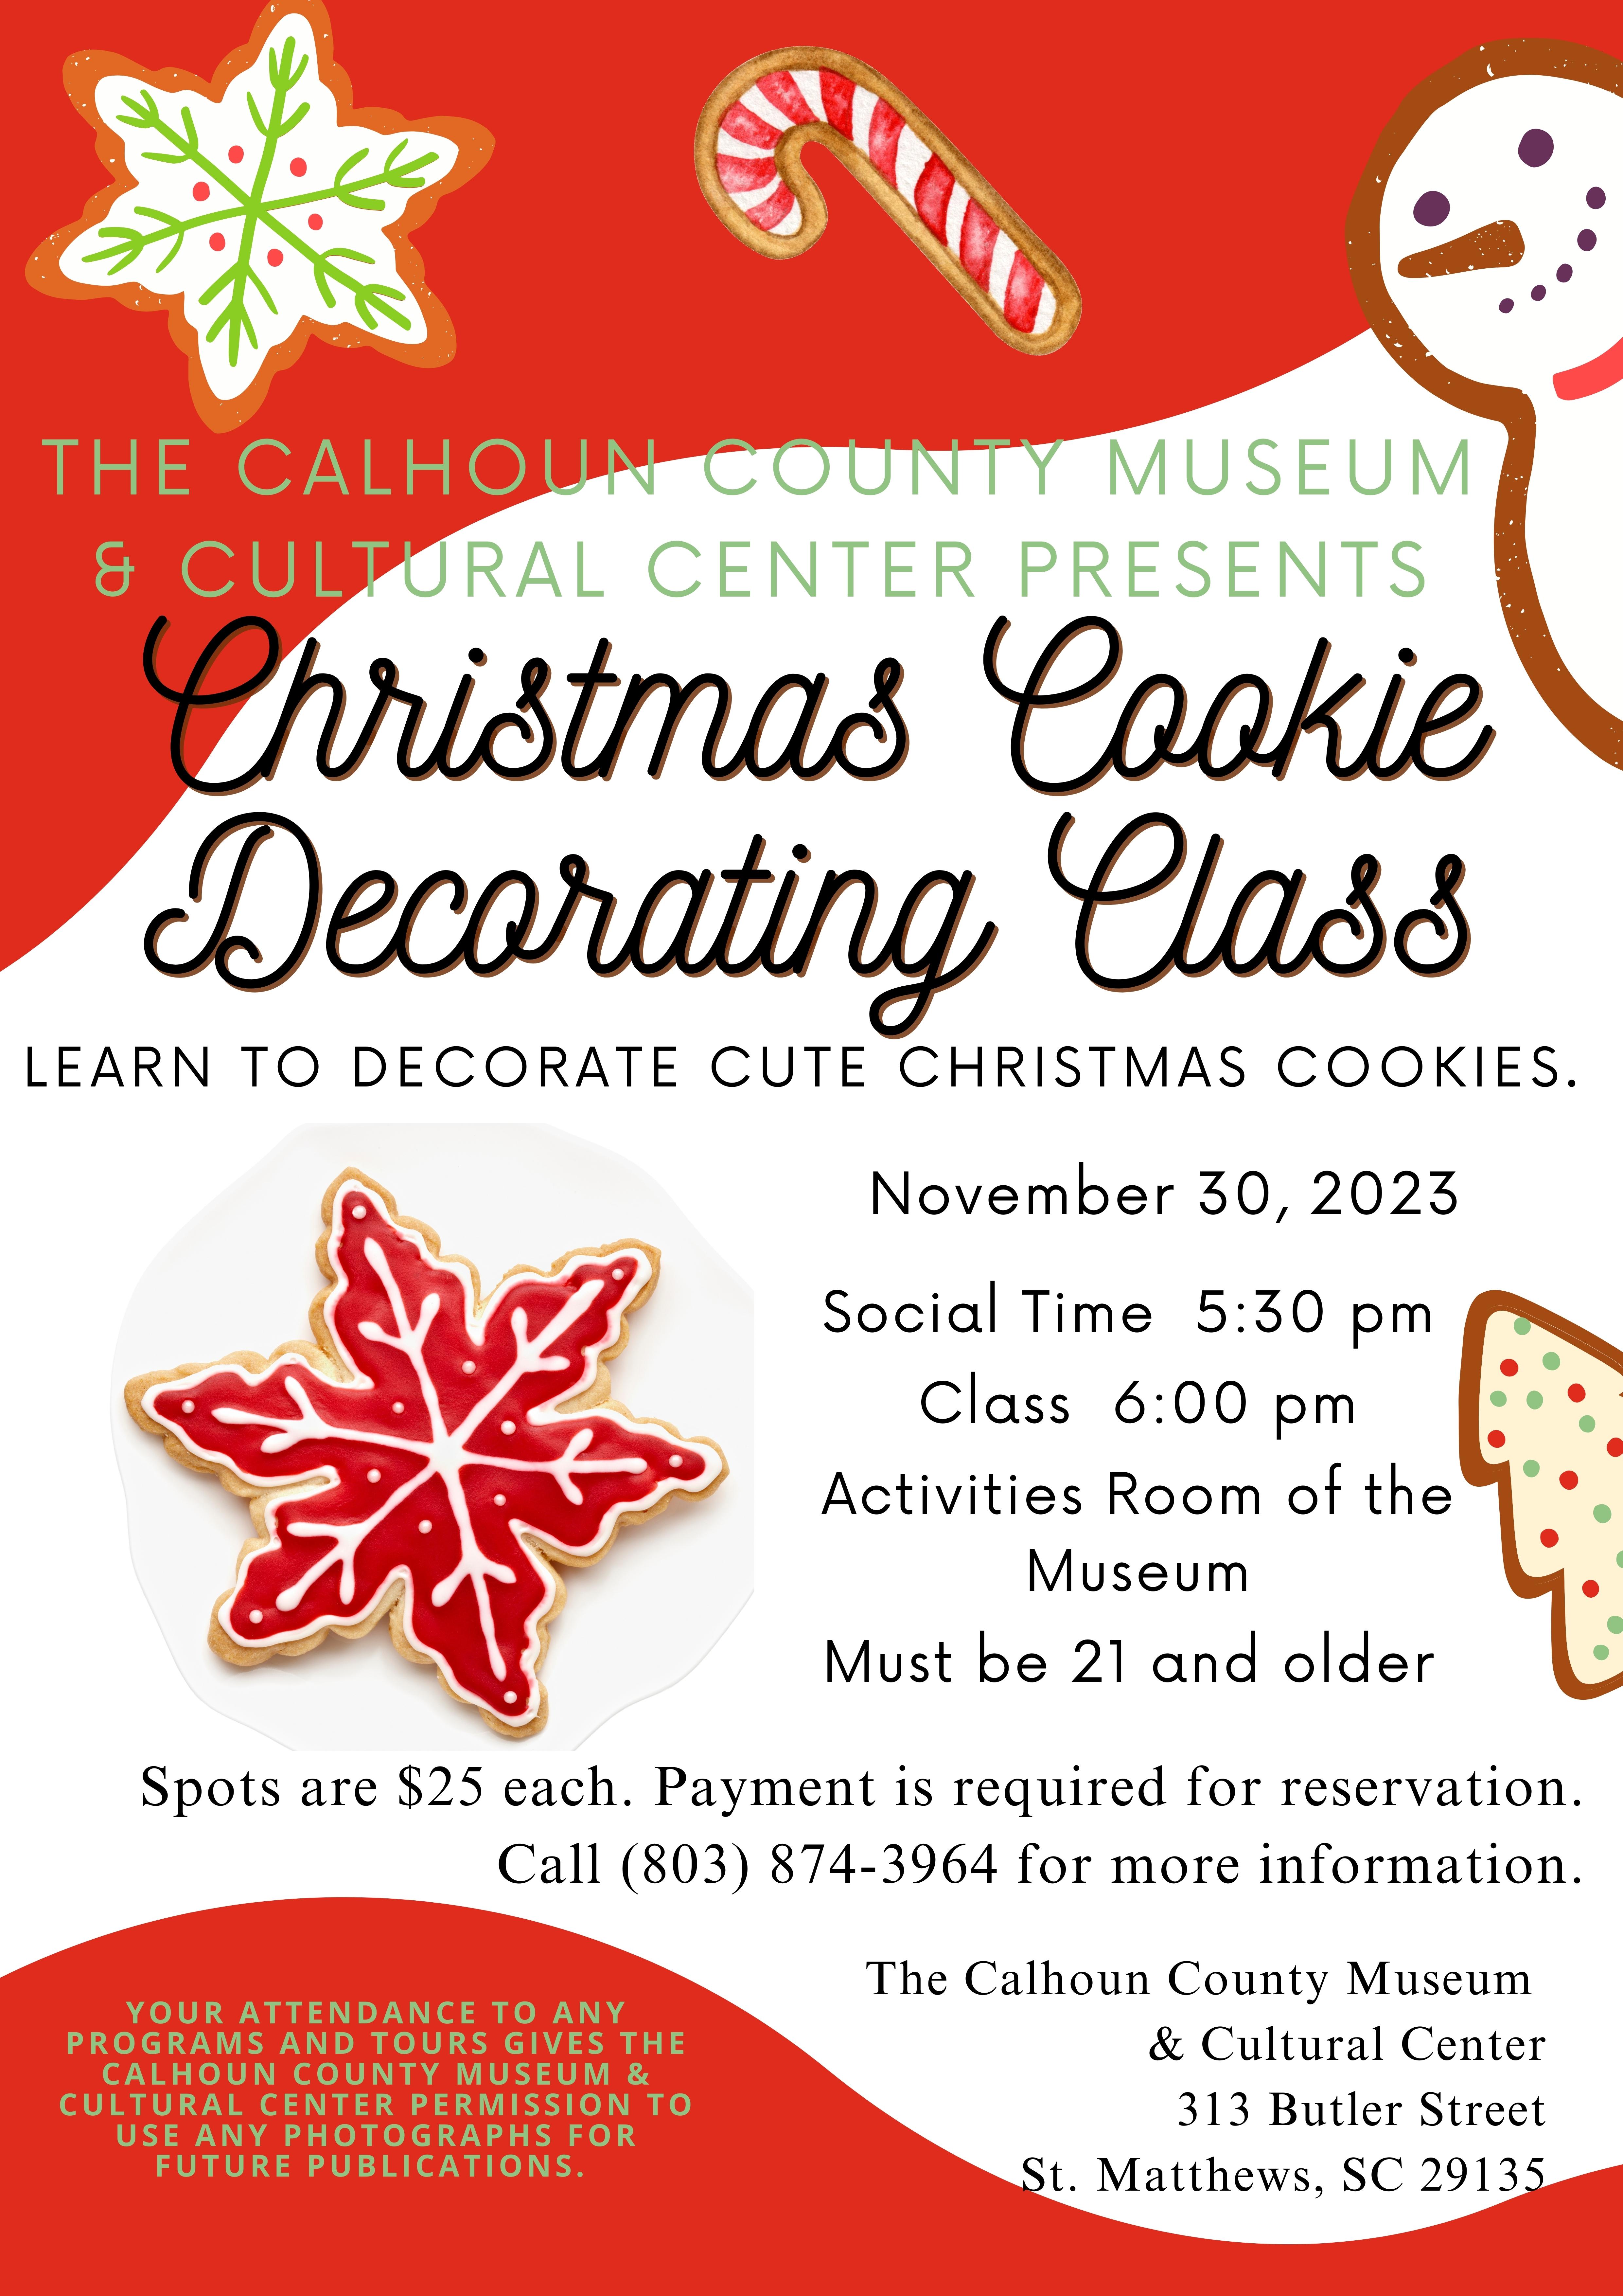 Museum to Host Christmas Cookie Decorating Class